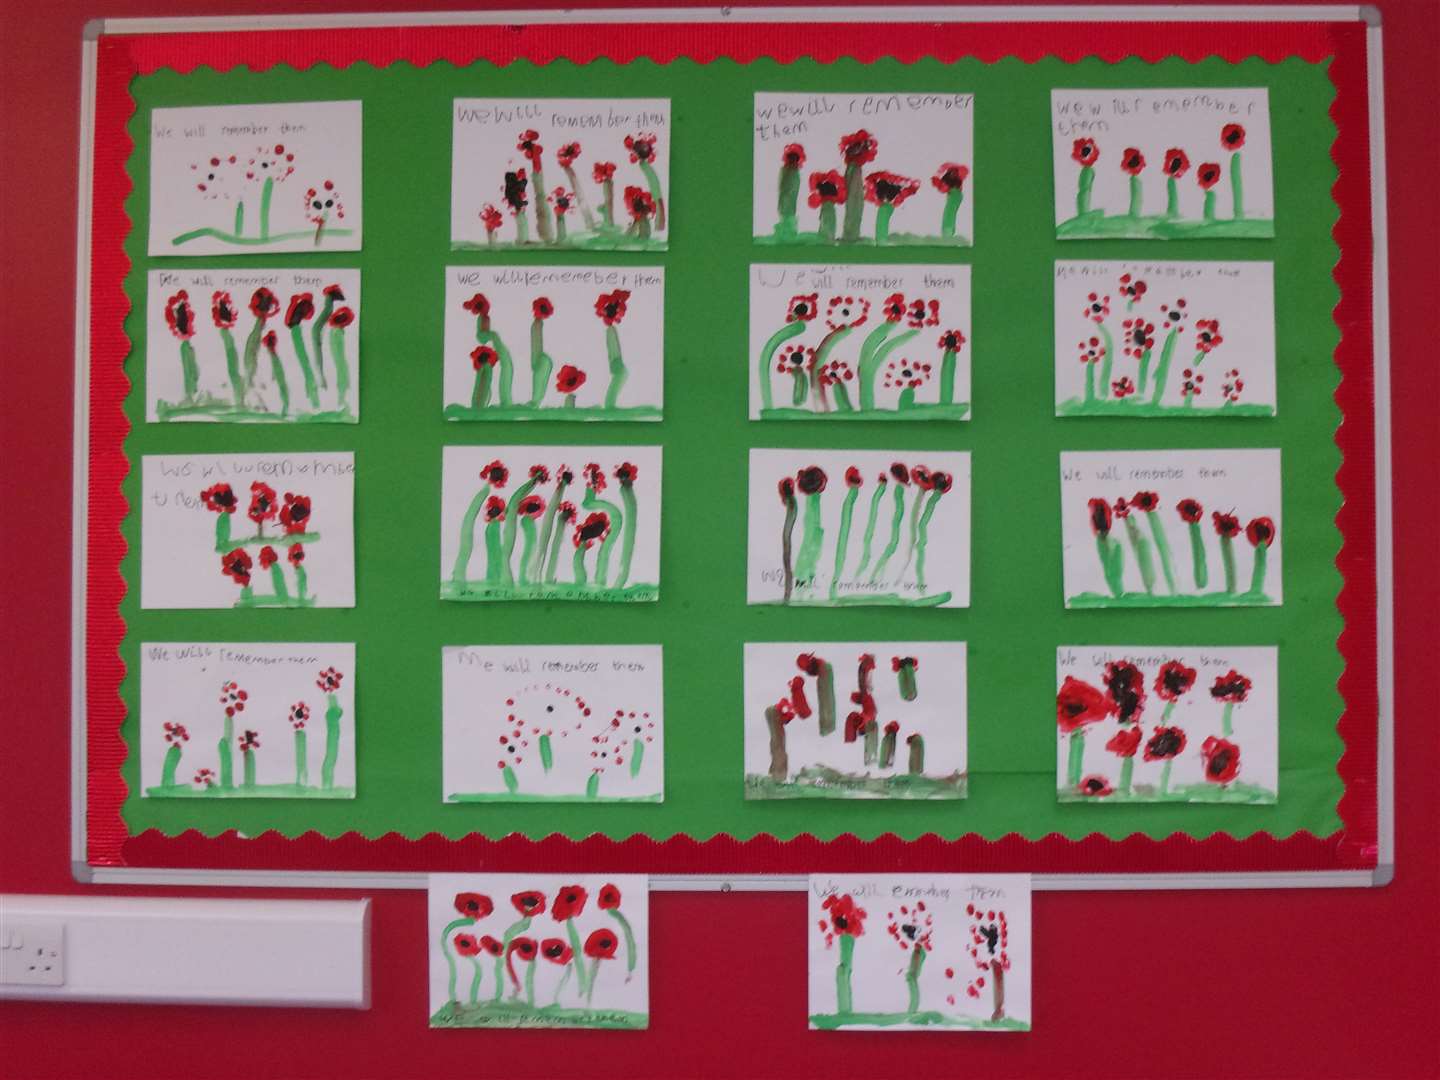 Some of the remembrance materials produced by the children.